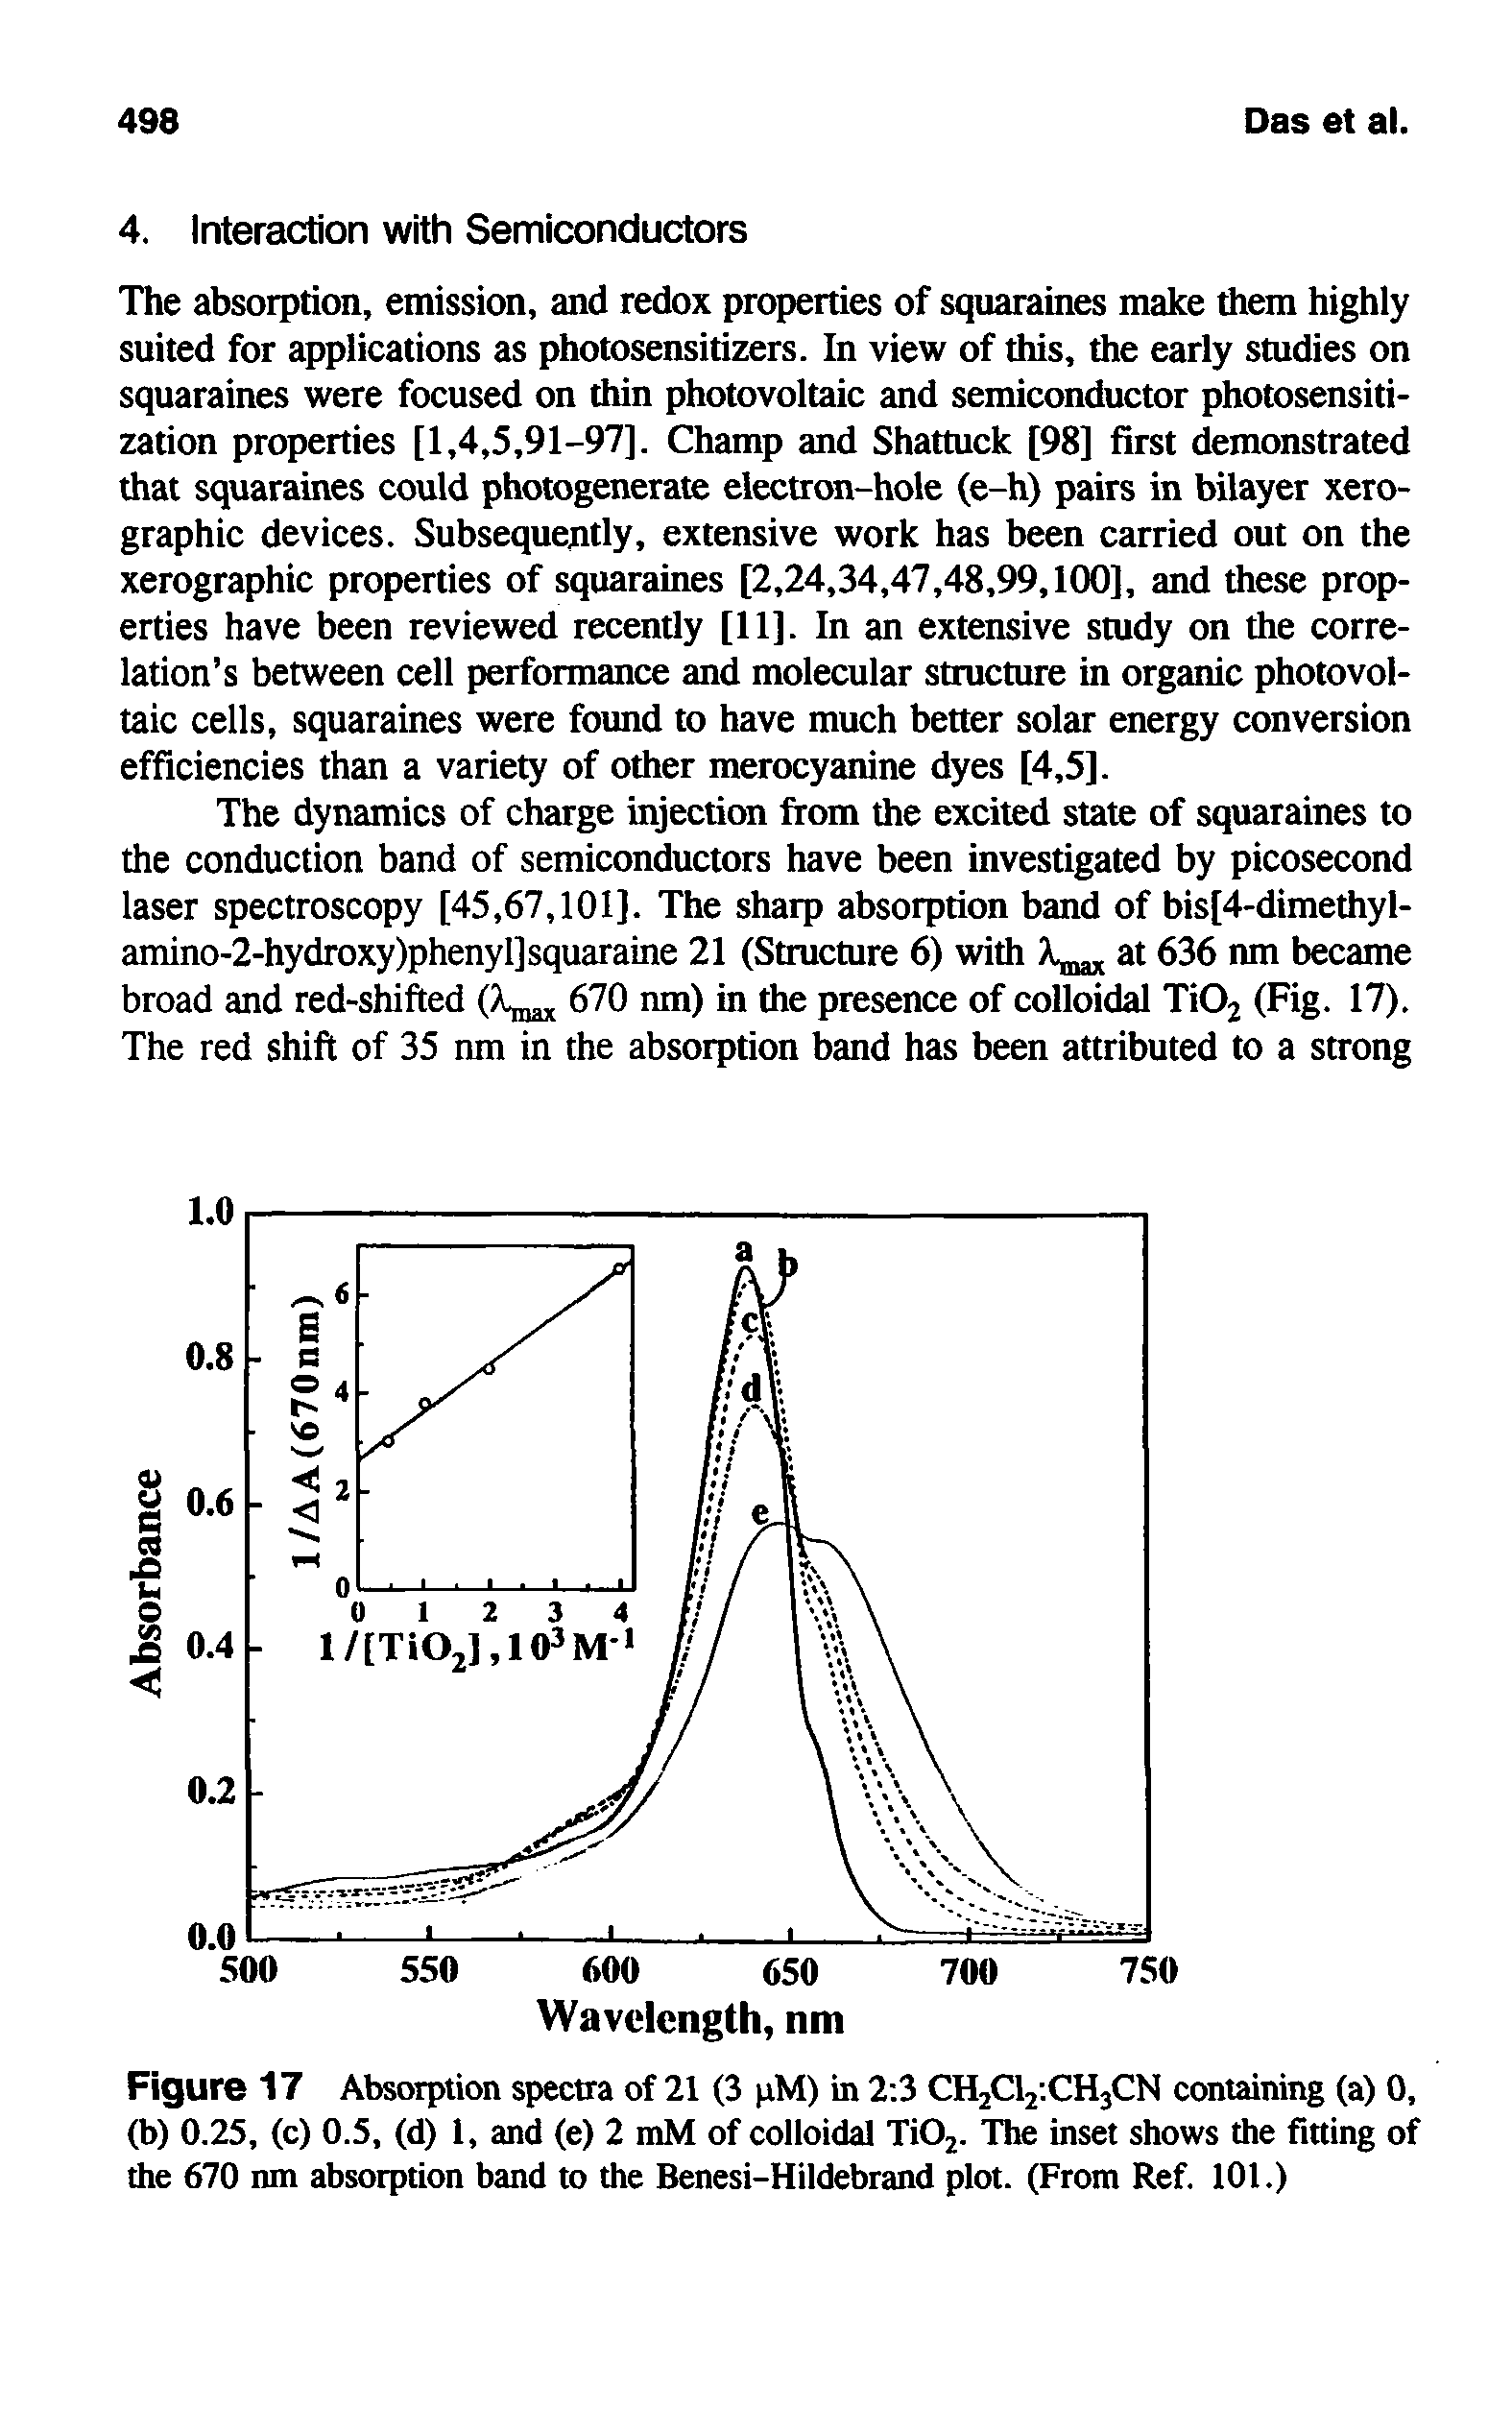 Figure 17 Absorption spectra of 21 (3 pM) in 2 3 CHjClj.CHjCN containing (a) 0, (b) 0.25, (c) 0.5, (d) 1, and (e) 2 mM of colloidal Ti02. The inset shows the fitting of the 670 nm absorption band to the Benesi-Hildebrand plot. (From Ref. 101.)...